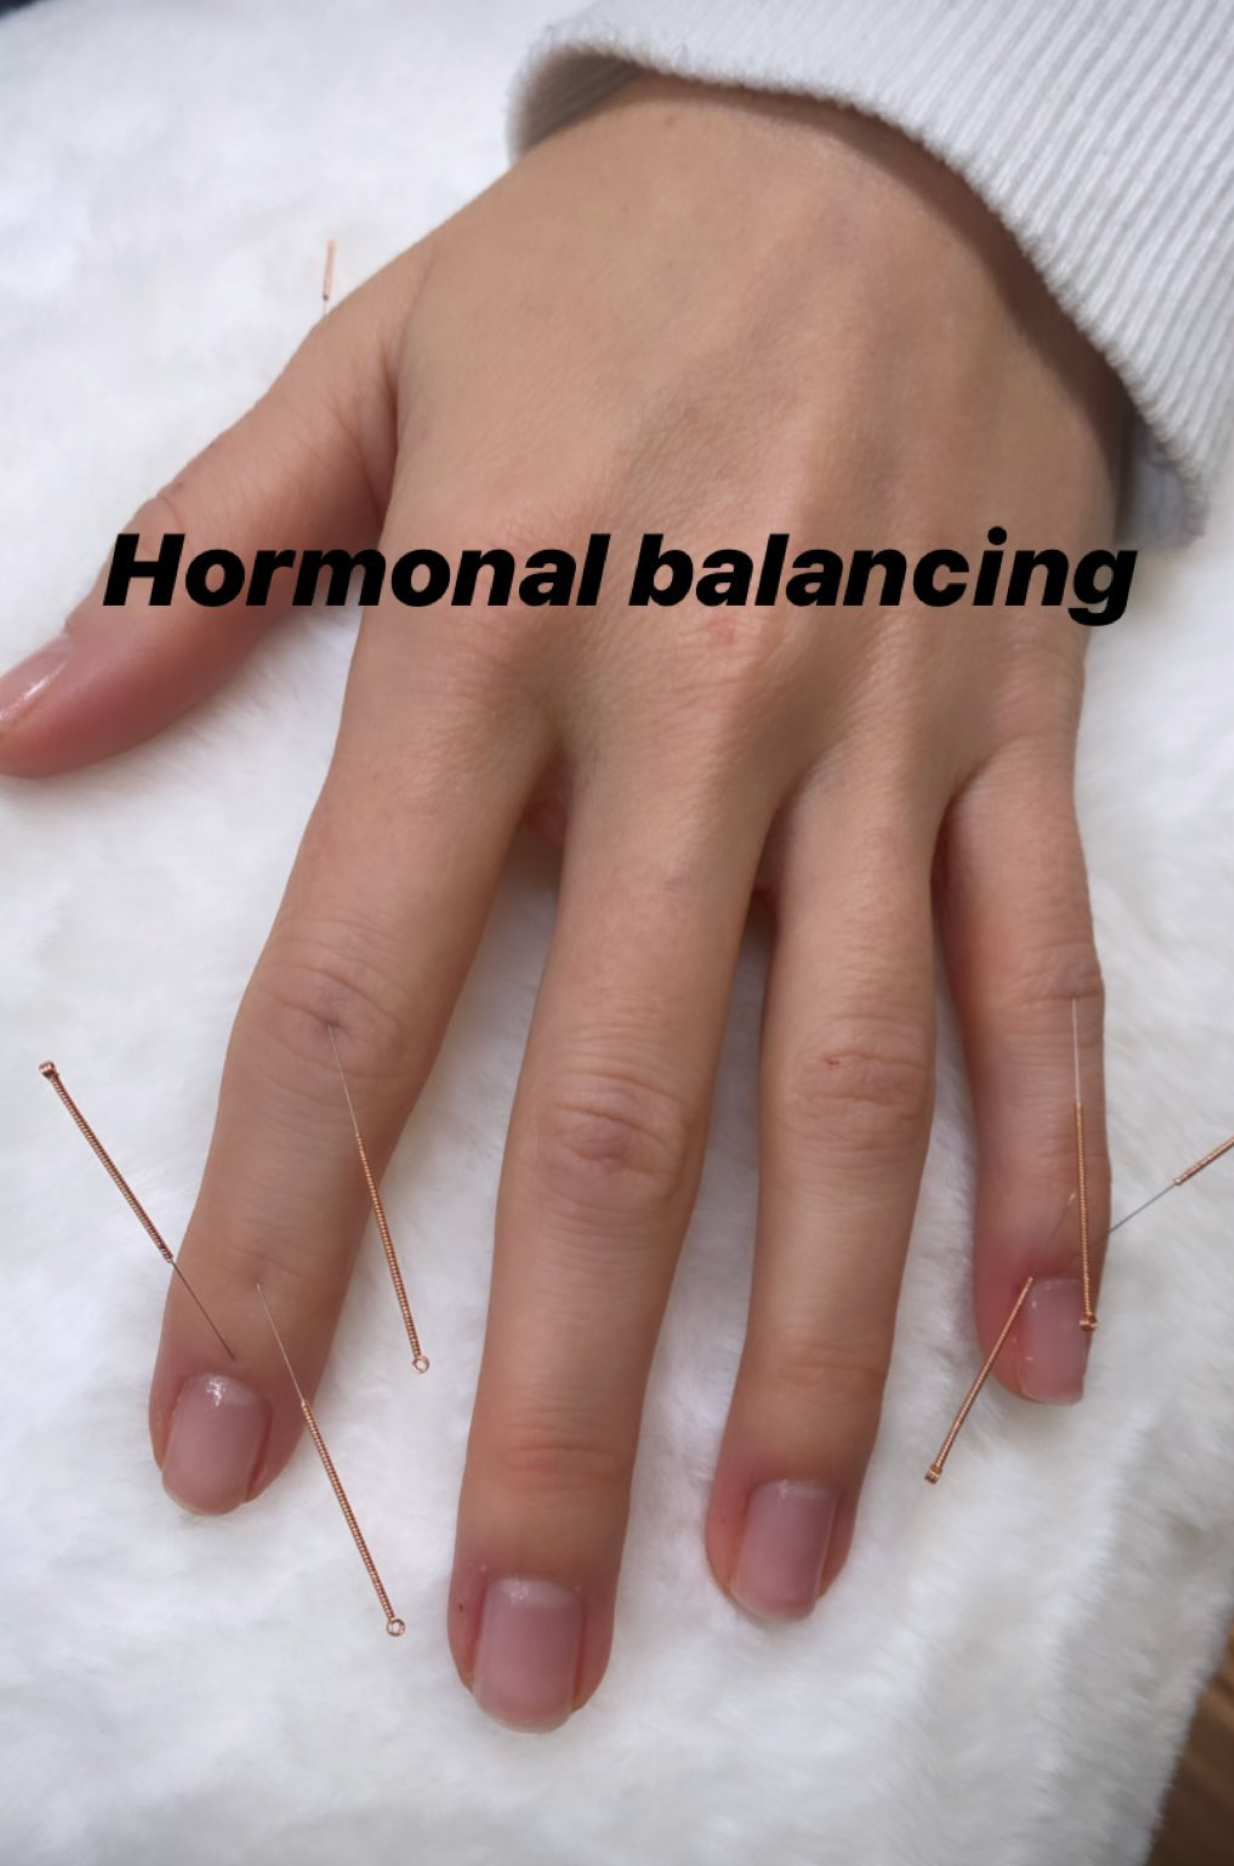  SuJok Acupuncture in Vancouver used to treat patients for Hormonal Balancing. Patient was treated for hormonal balancing 